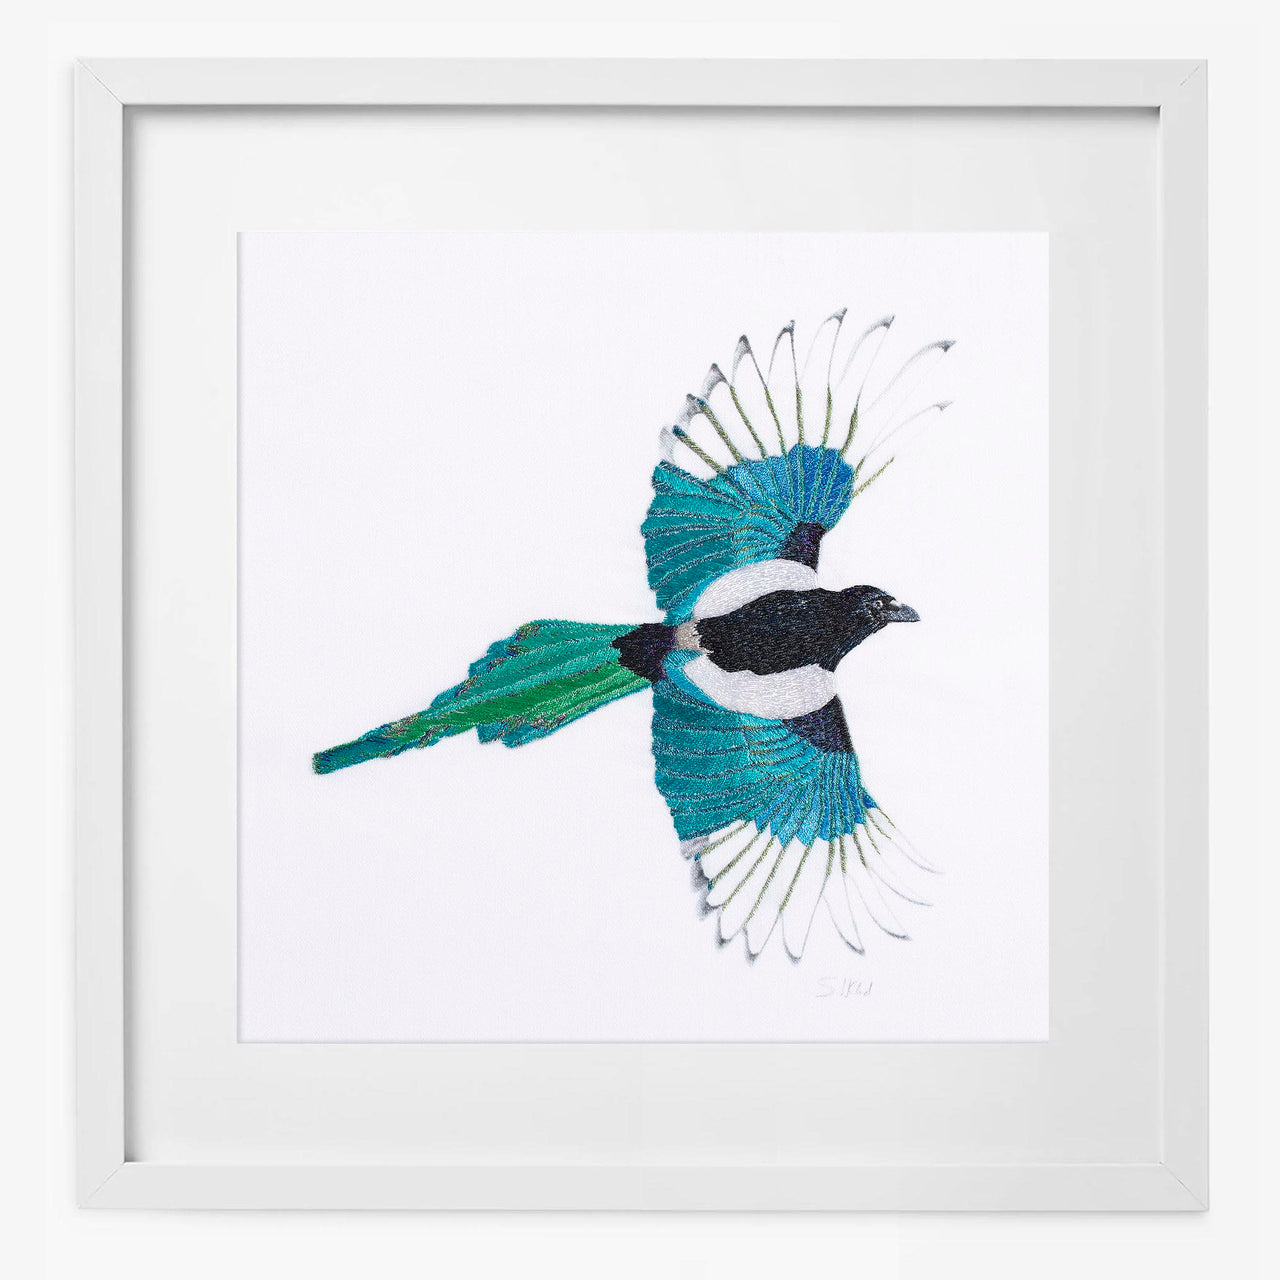 Hand embroidered flying magpie limited edition print in white frame